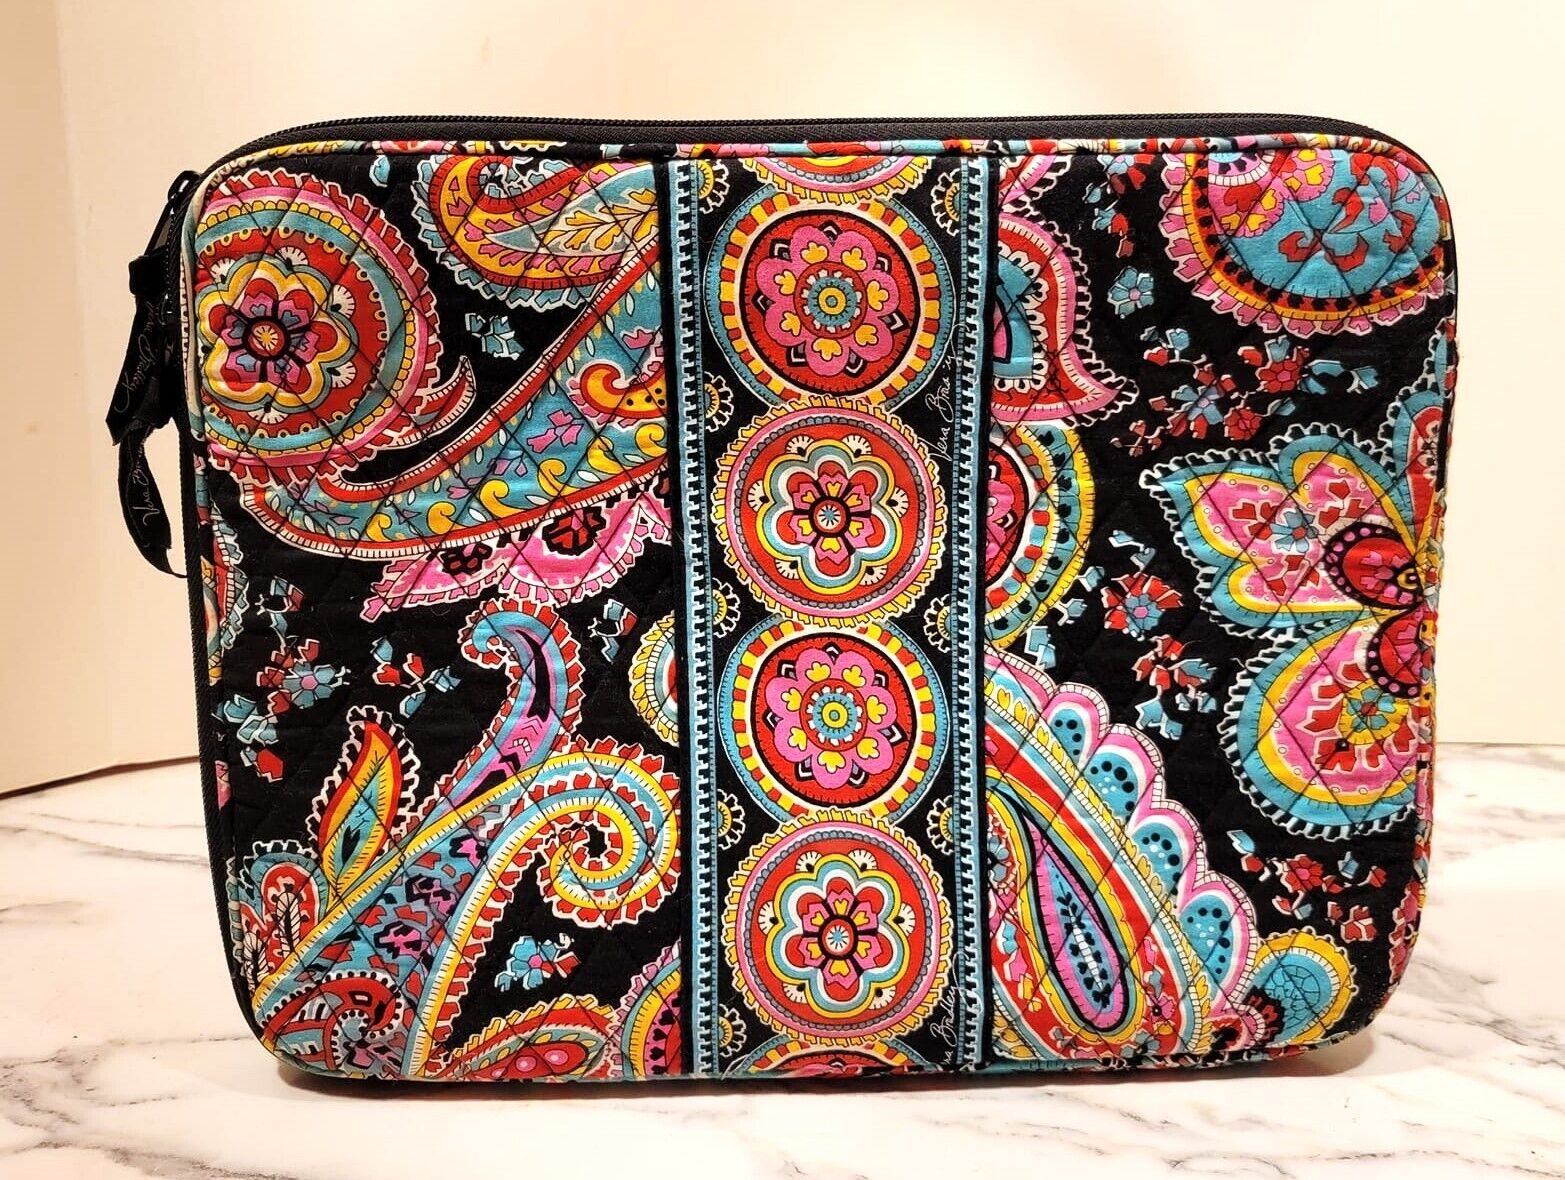 VERA BRADLEY Quilted Laptop Tablet Sleeve 13”x10” Case Black w/Colorful Paisley